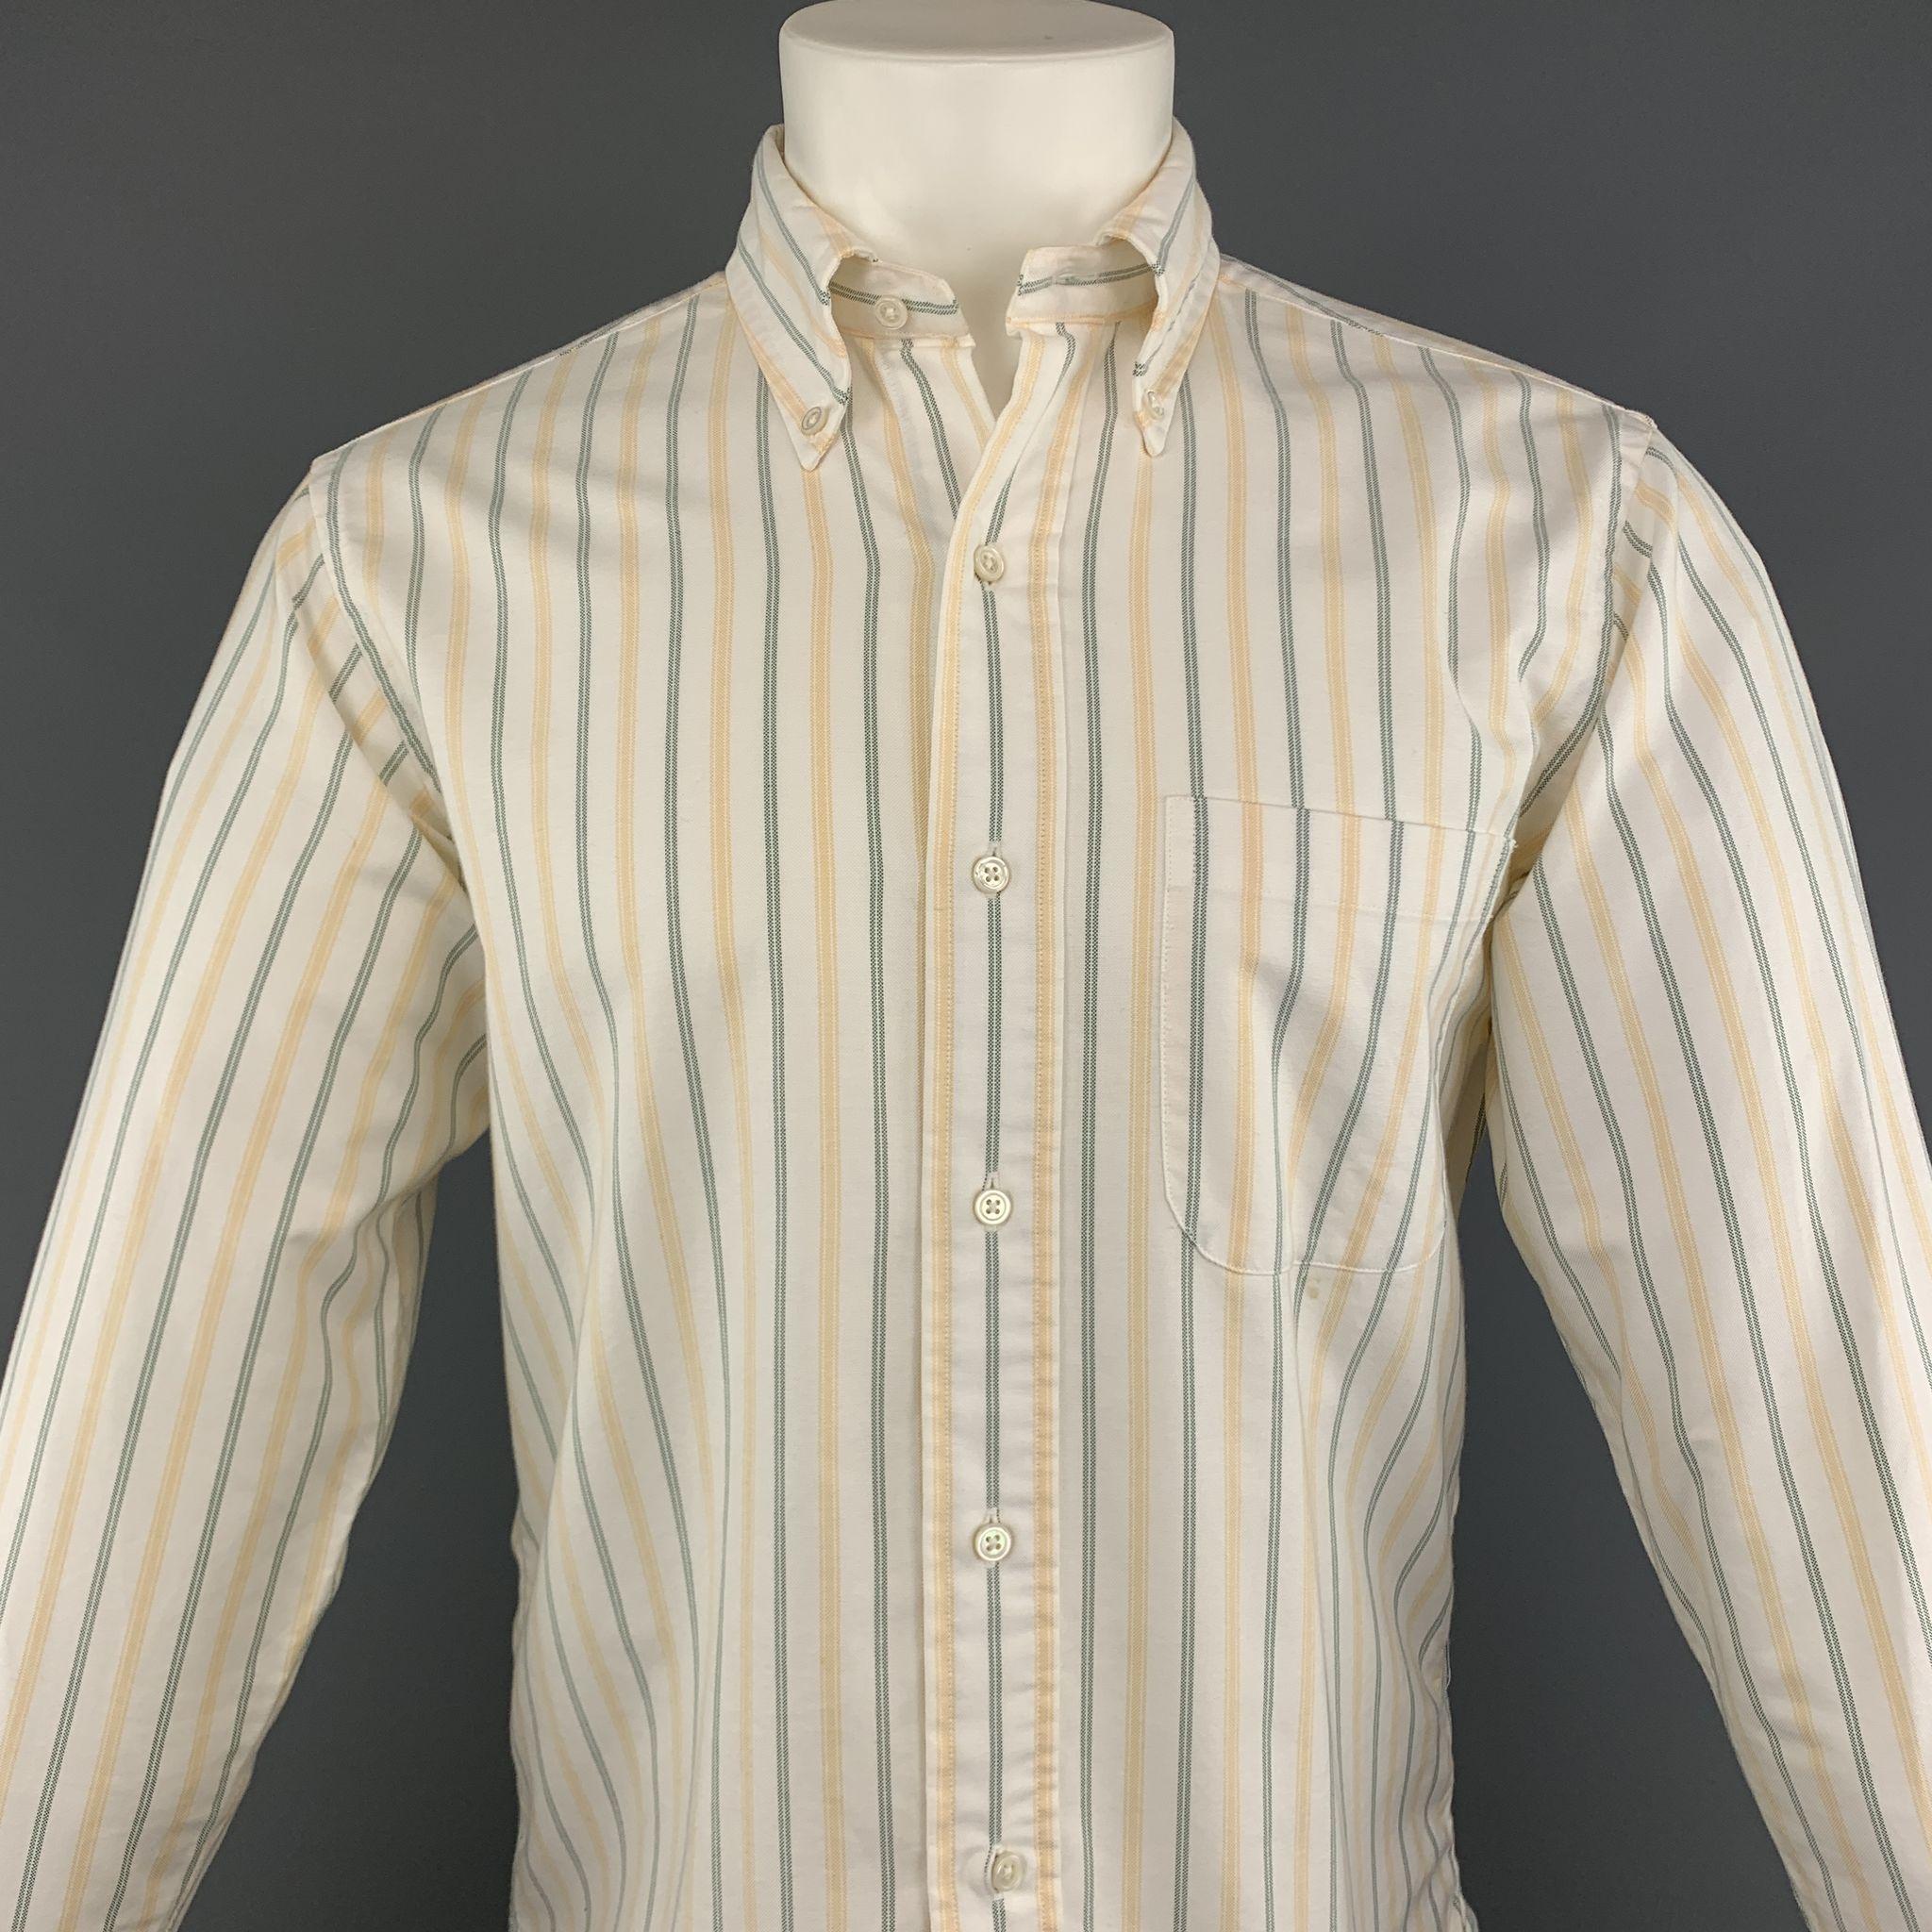 BLACK FLEECE long sleeve shirt comes in a white cotton with green and yellow striped featuring a button down style and a front patch pocket. Minor stains in front. As-Is. Made in USA.
 
Good Pre-Owned Condition.
Marked: BB1
 
Measurements:
